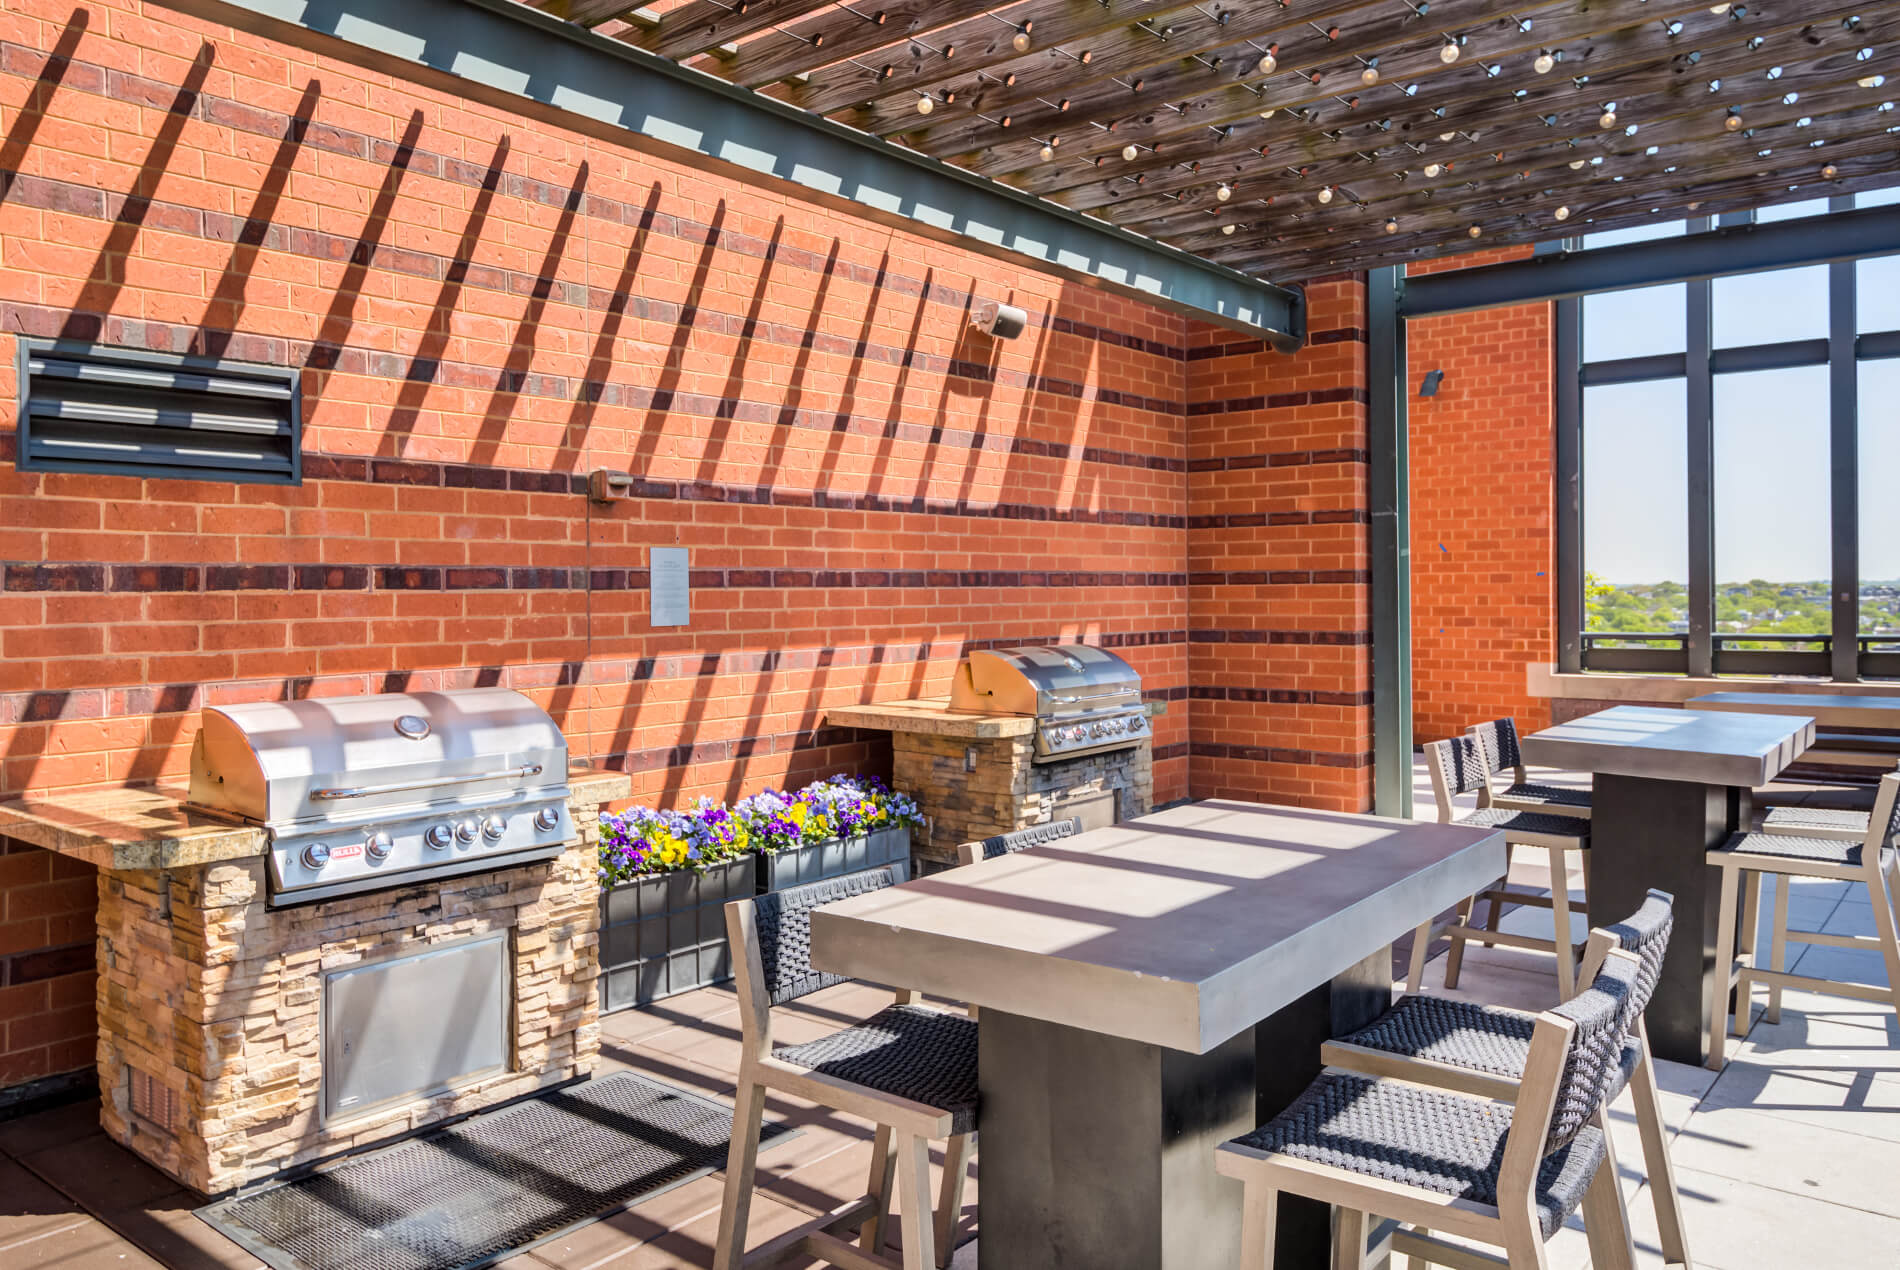 Two grilling stations with adjoining tables